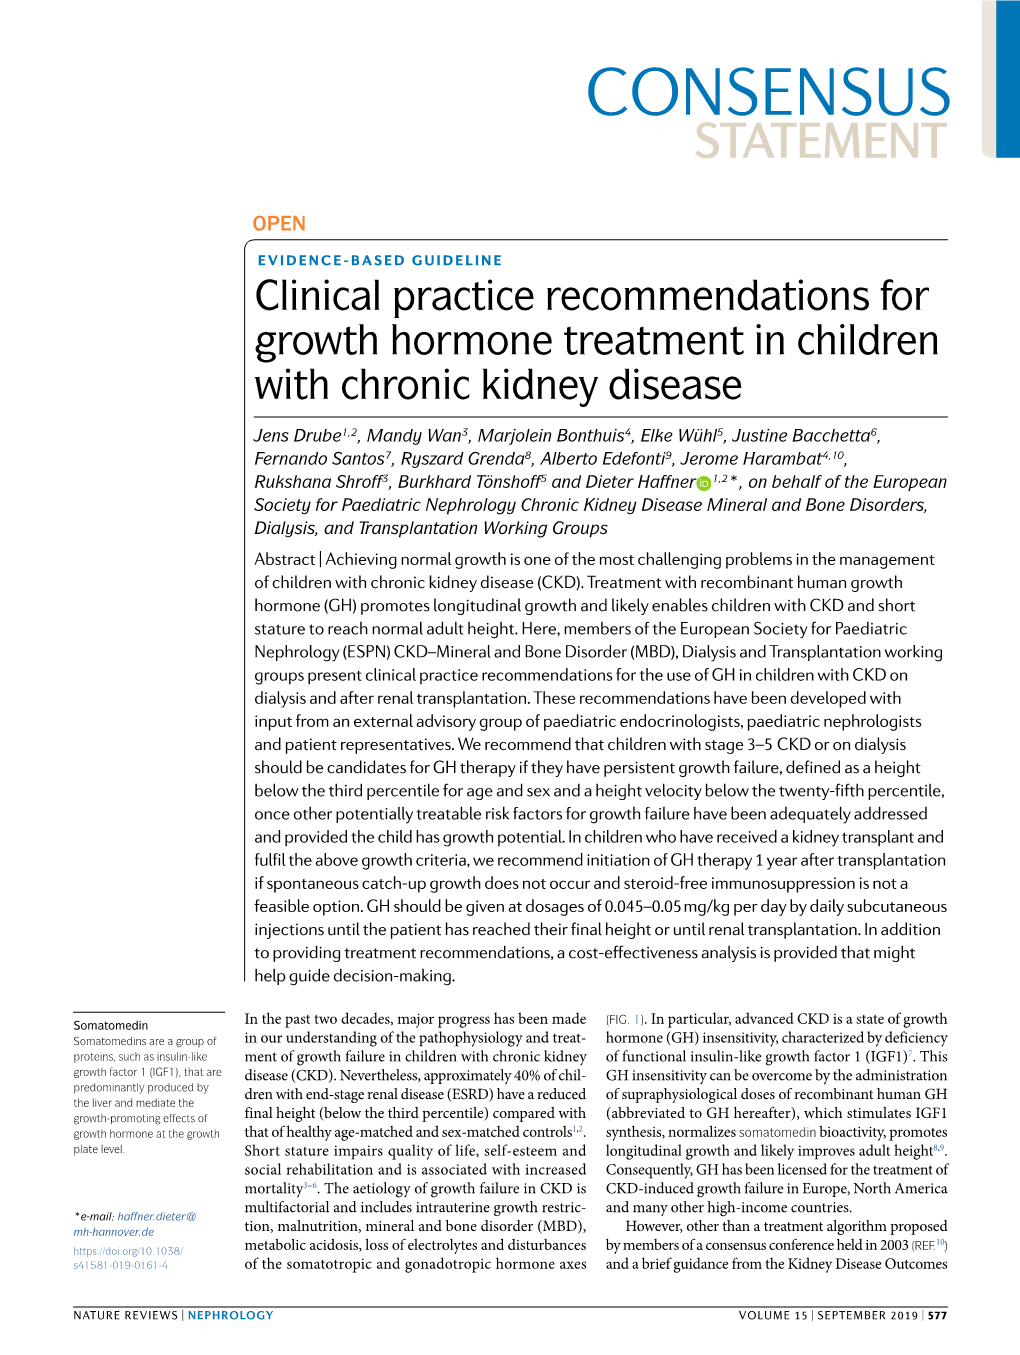 Clinical Practice Recommendations for Growth Hormone Treatment in Children with Chronic Kidney Disease